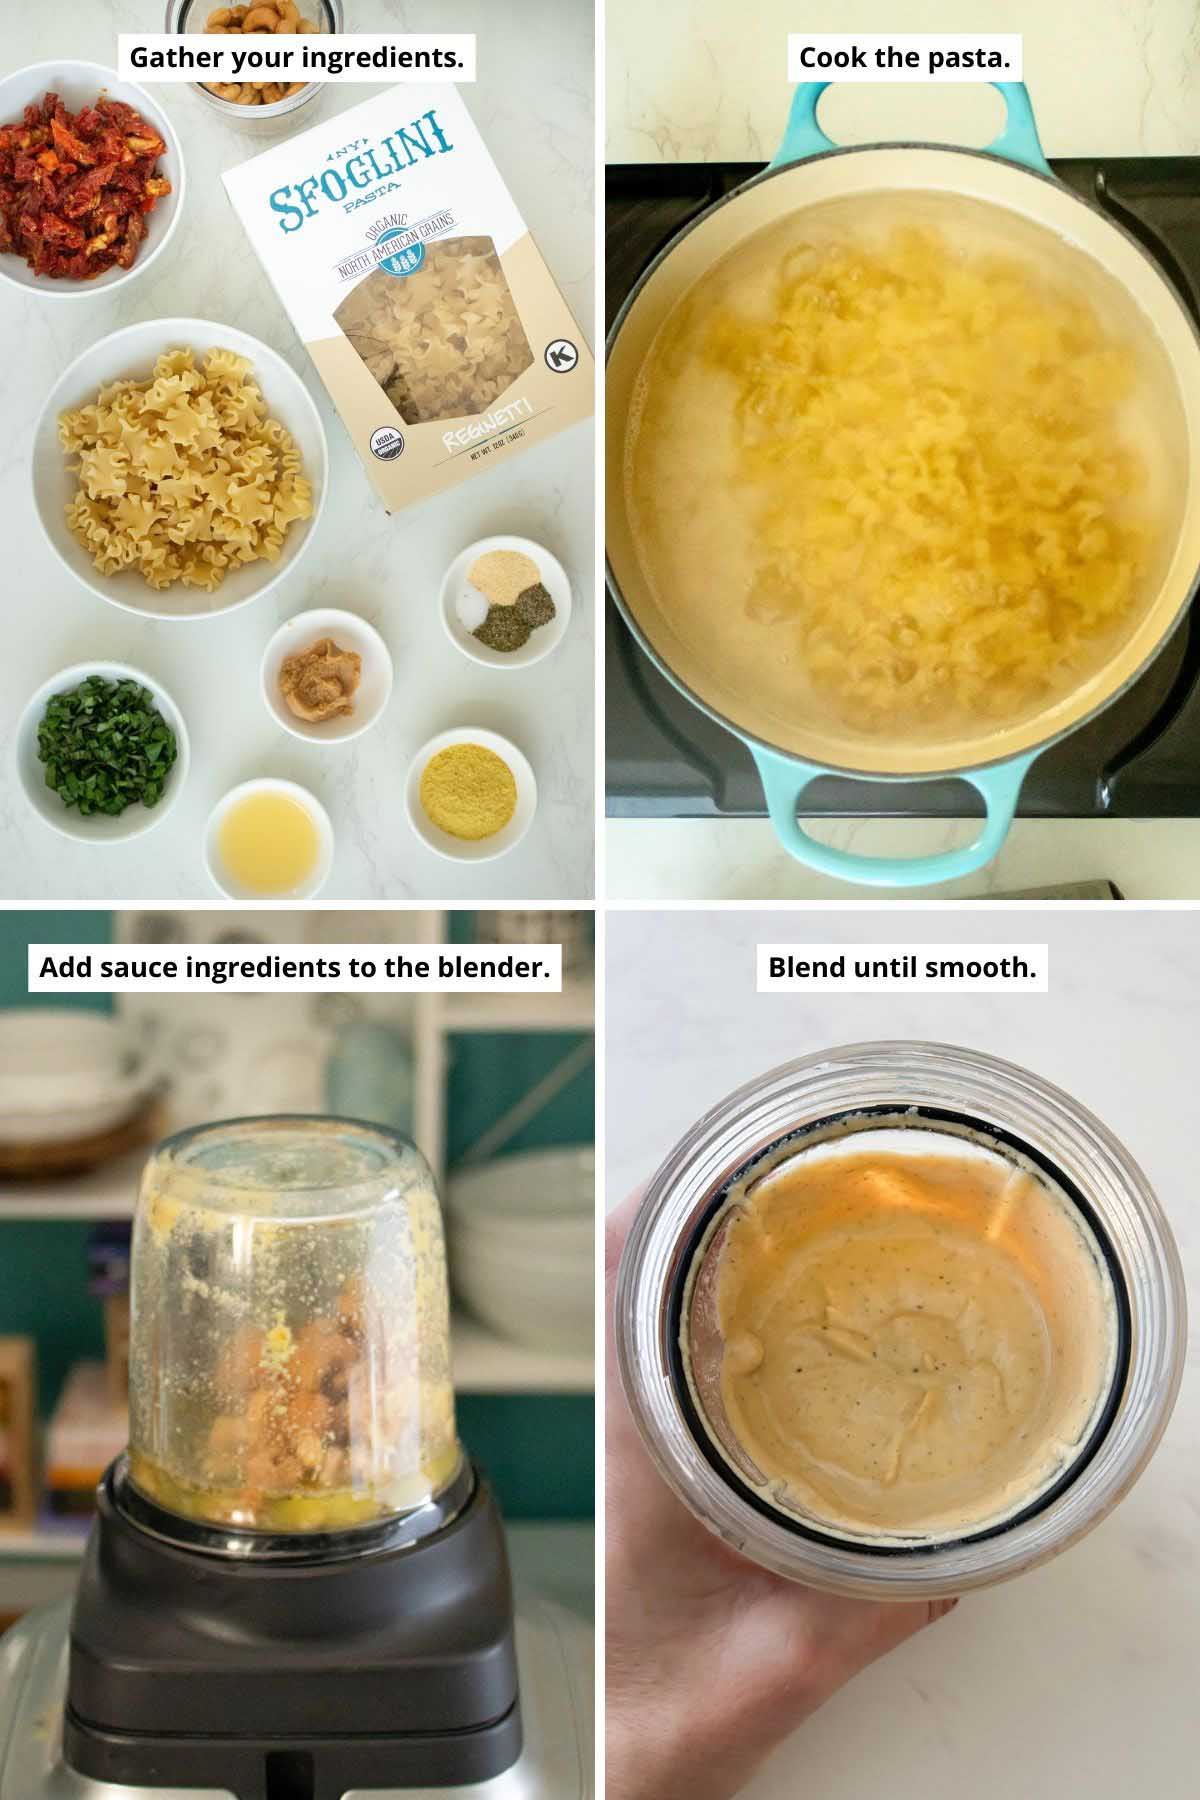 image collage showing prepped ingredients, boiling pasta, and sauce ingredients in the blender before and after blending